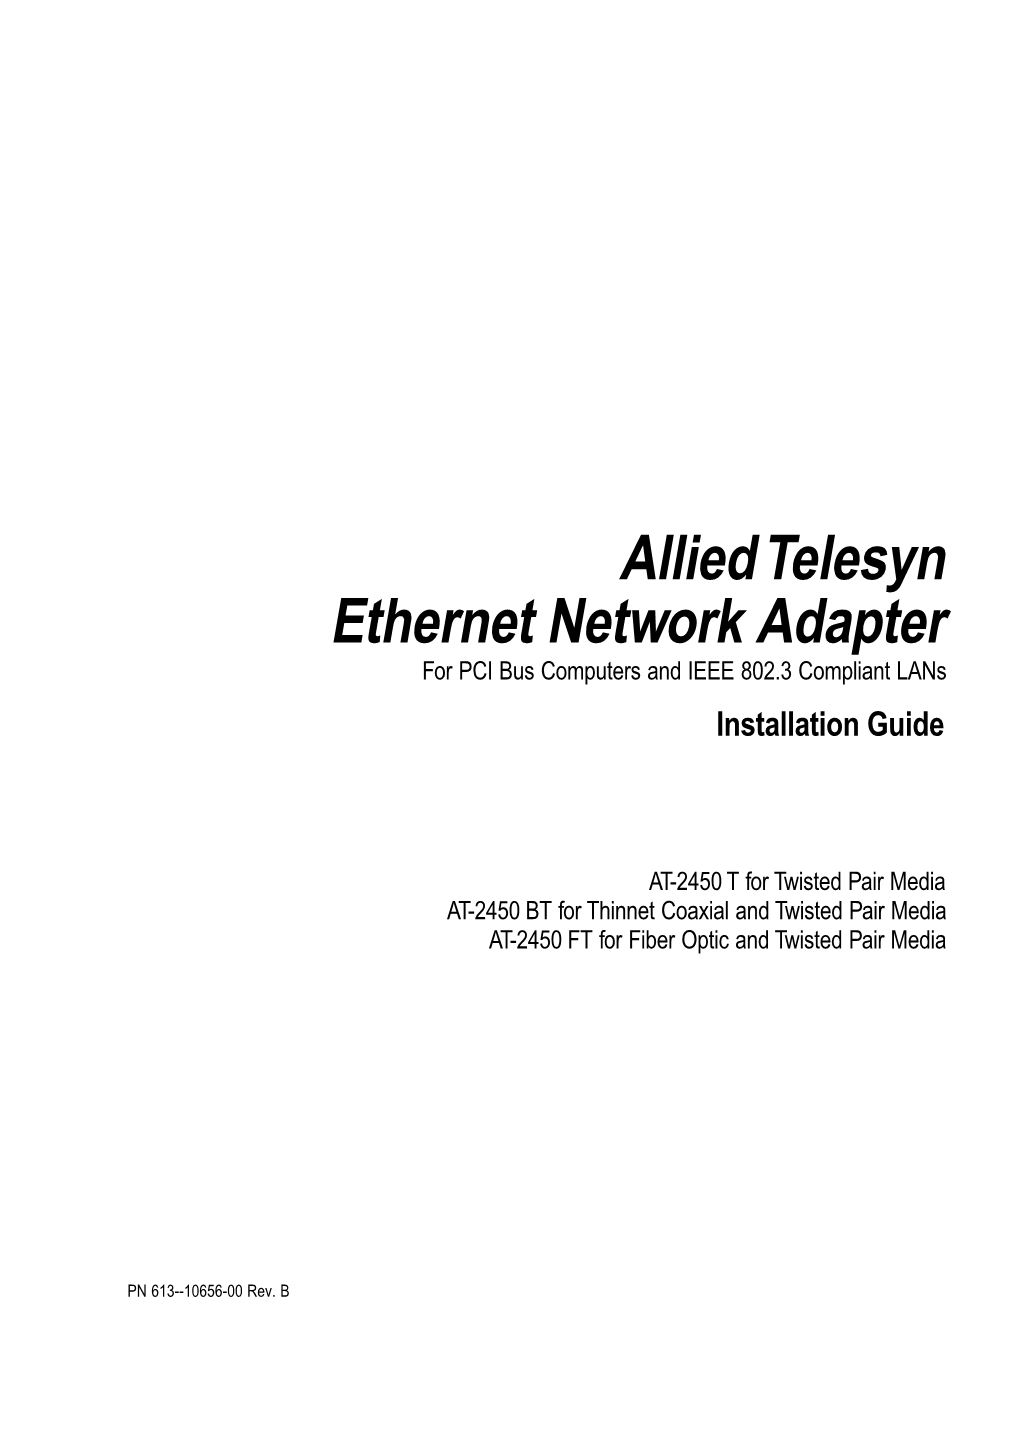 Allied Telesyn Ethernet Network Adapter for PCI Bus Computers and IEEE 802.3 Compliant Lans Installation Guide